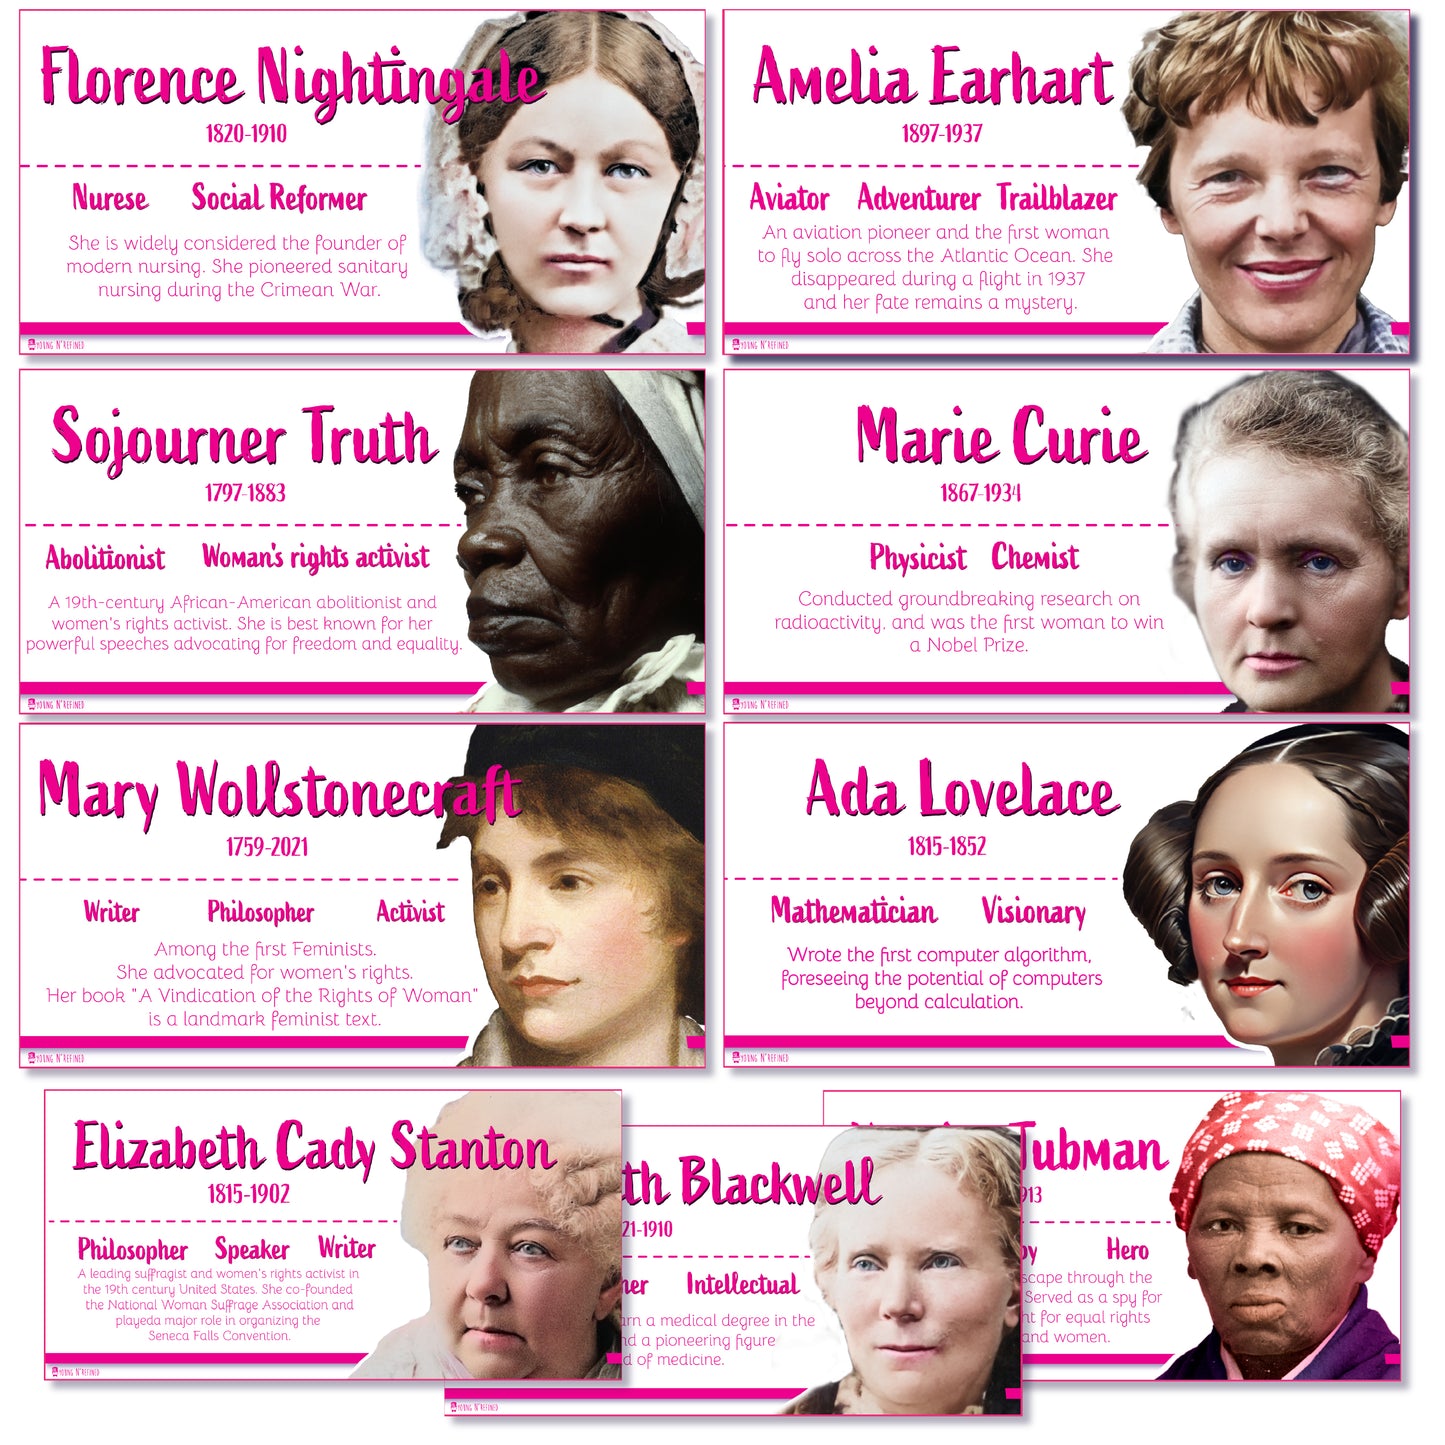 Historic Women Poster Bulletin Board Set, 9 Charts Pack Glossy Paper